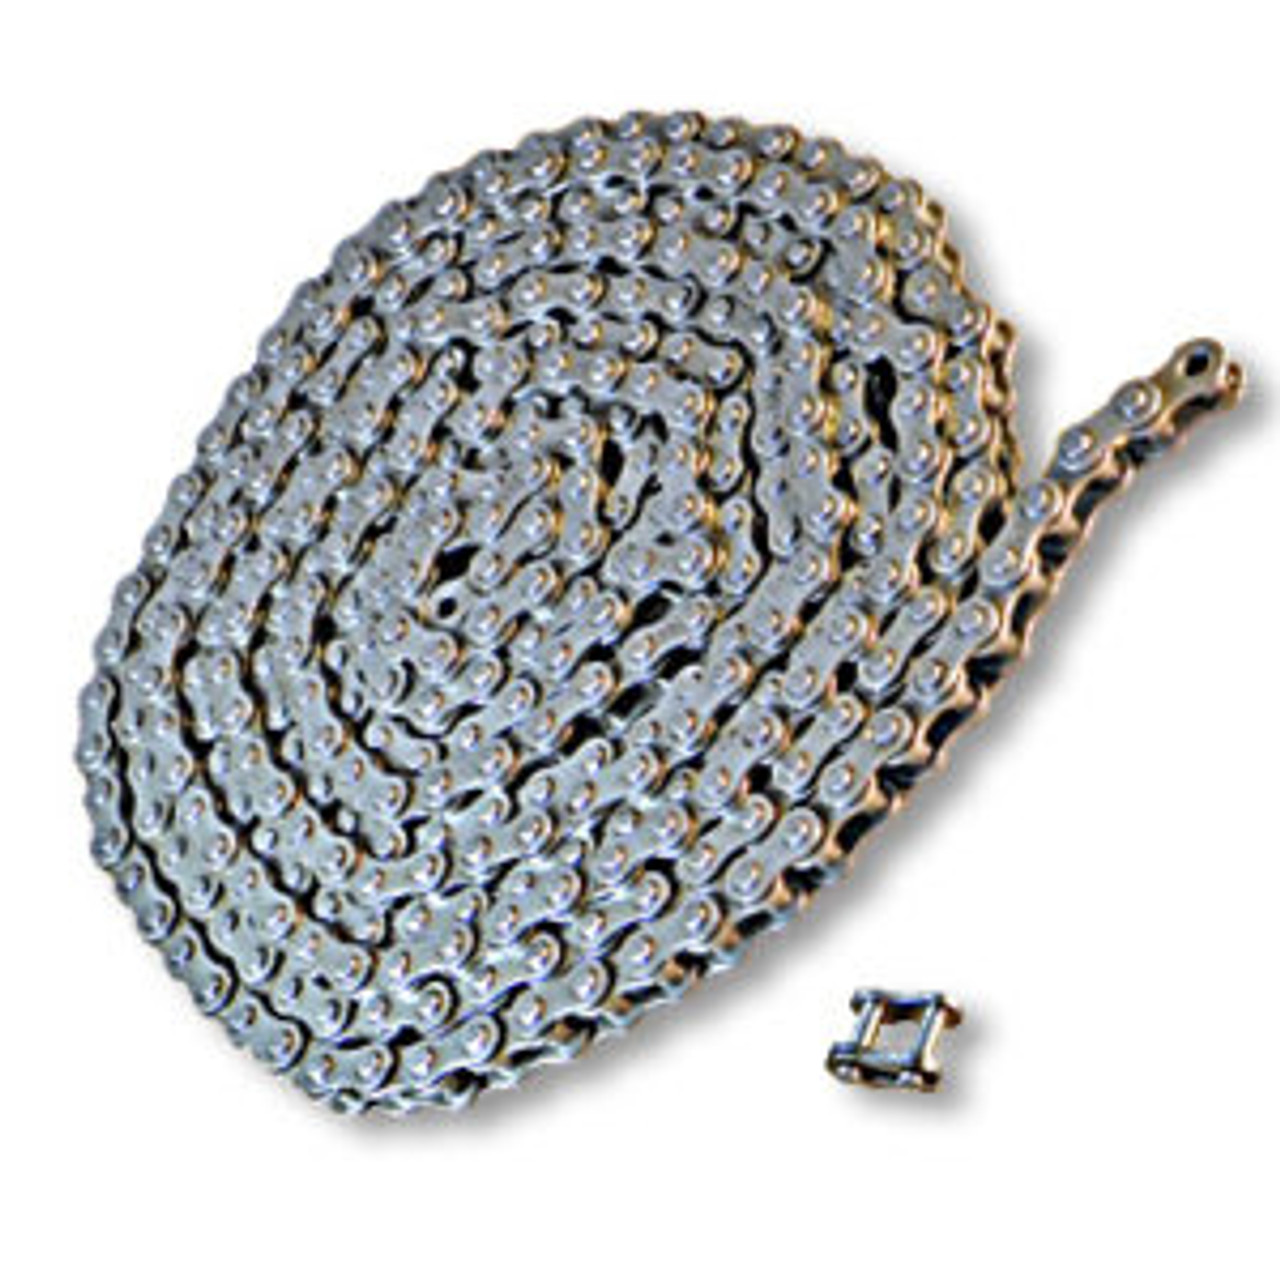 #35 Space Chain, 40" (105 Pitches), Packaged With Connecting Link